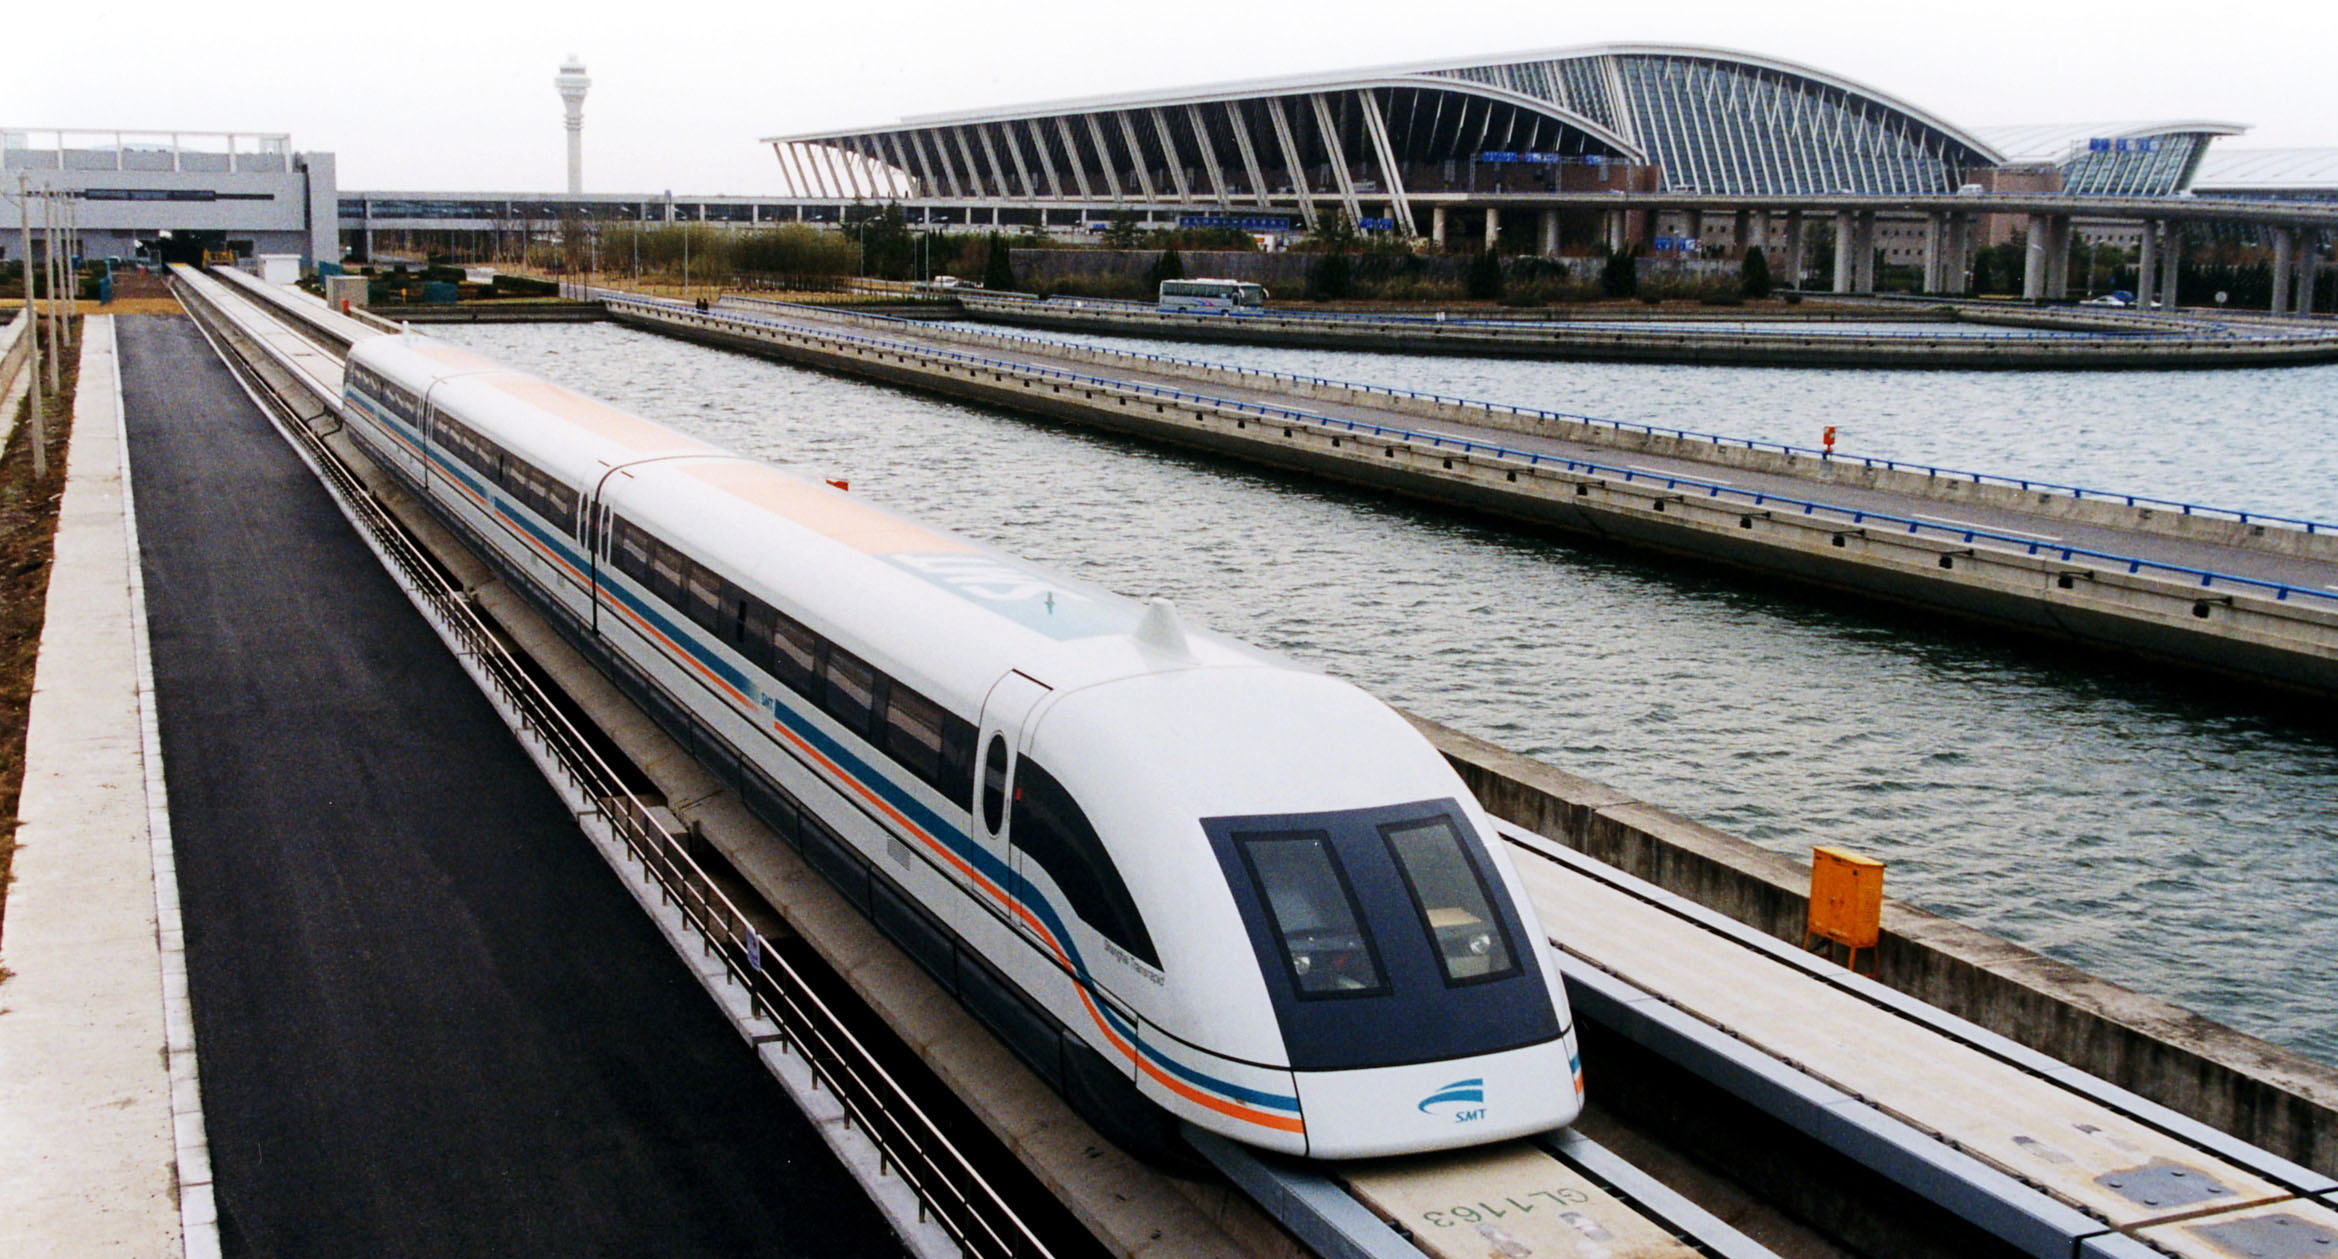 A_maglev_train_coming_out,_Pudong_International_Airport,_Shanghai.jpg